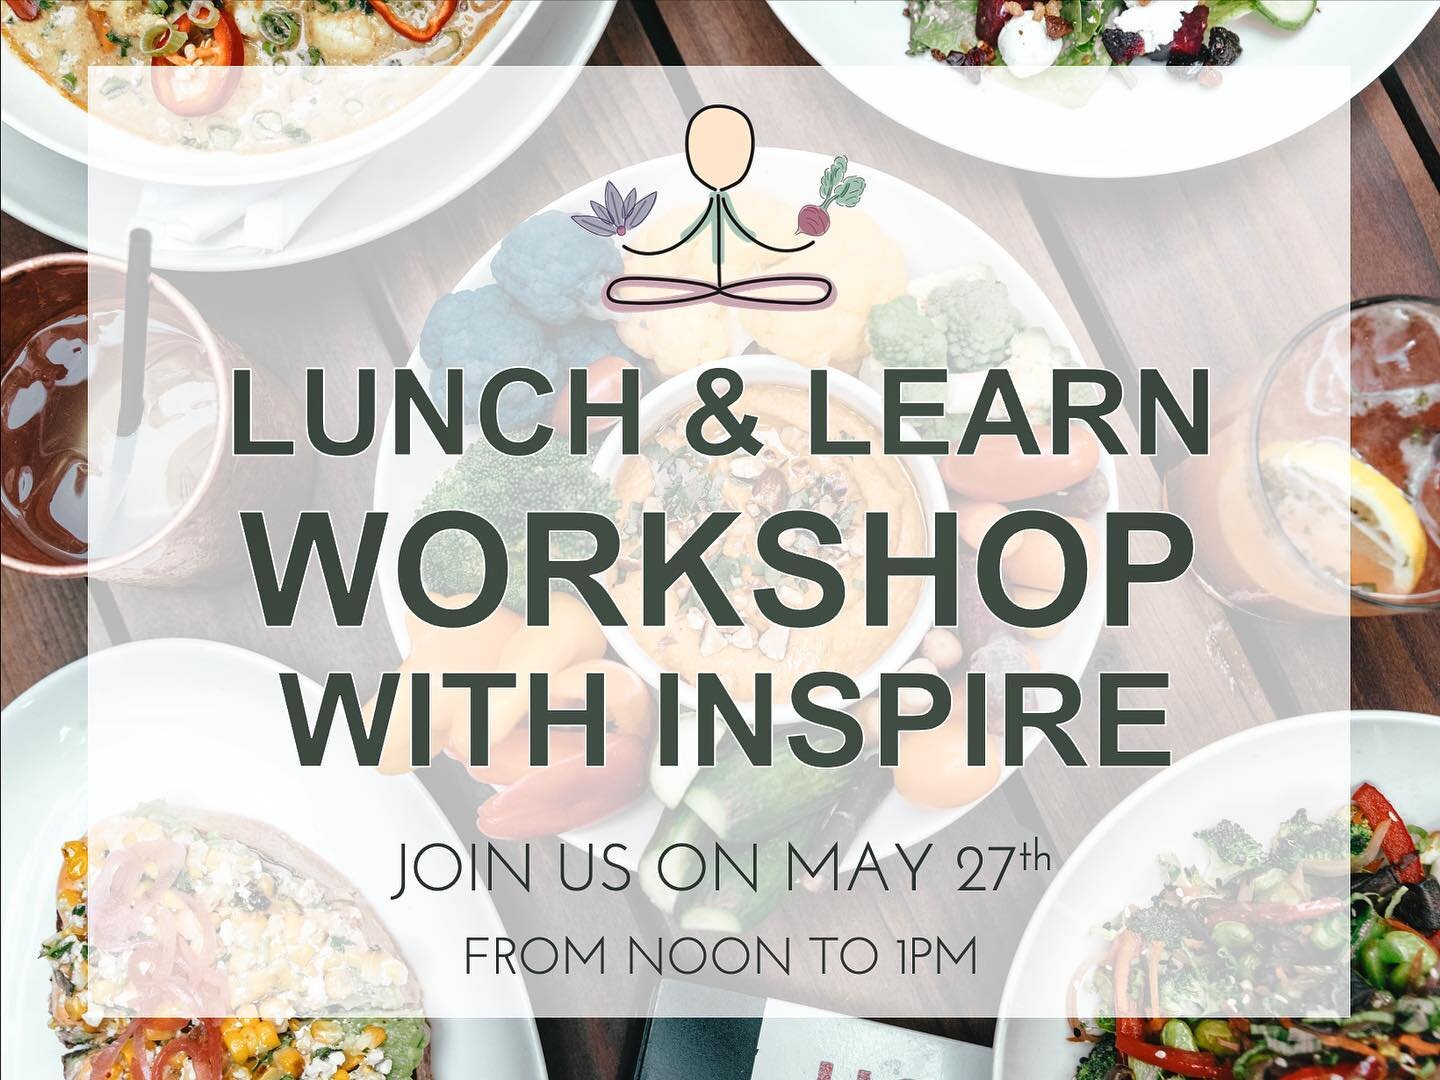 ✨Special Lunch &amp; Learn Workshop✨⁣⁣
⁣⁣
Are you looking for ways to improve your nutrition, lifestyle &amp; wellbeing?⁣⁣
Join us next Thursday, May 27, from Noon-1pm!⁣⁣
⁣⁣
➡️ Link in bio for more info :) ⁣
⁣
#mindfulness #nutrition #onlineworkshop 